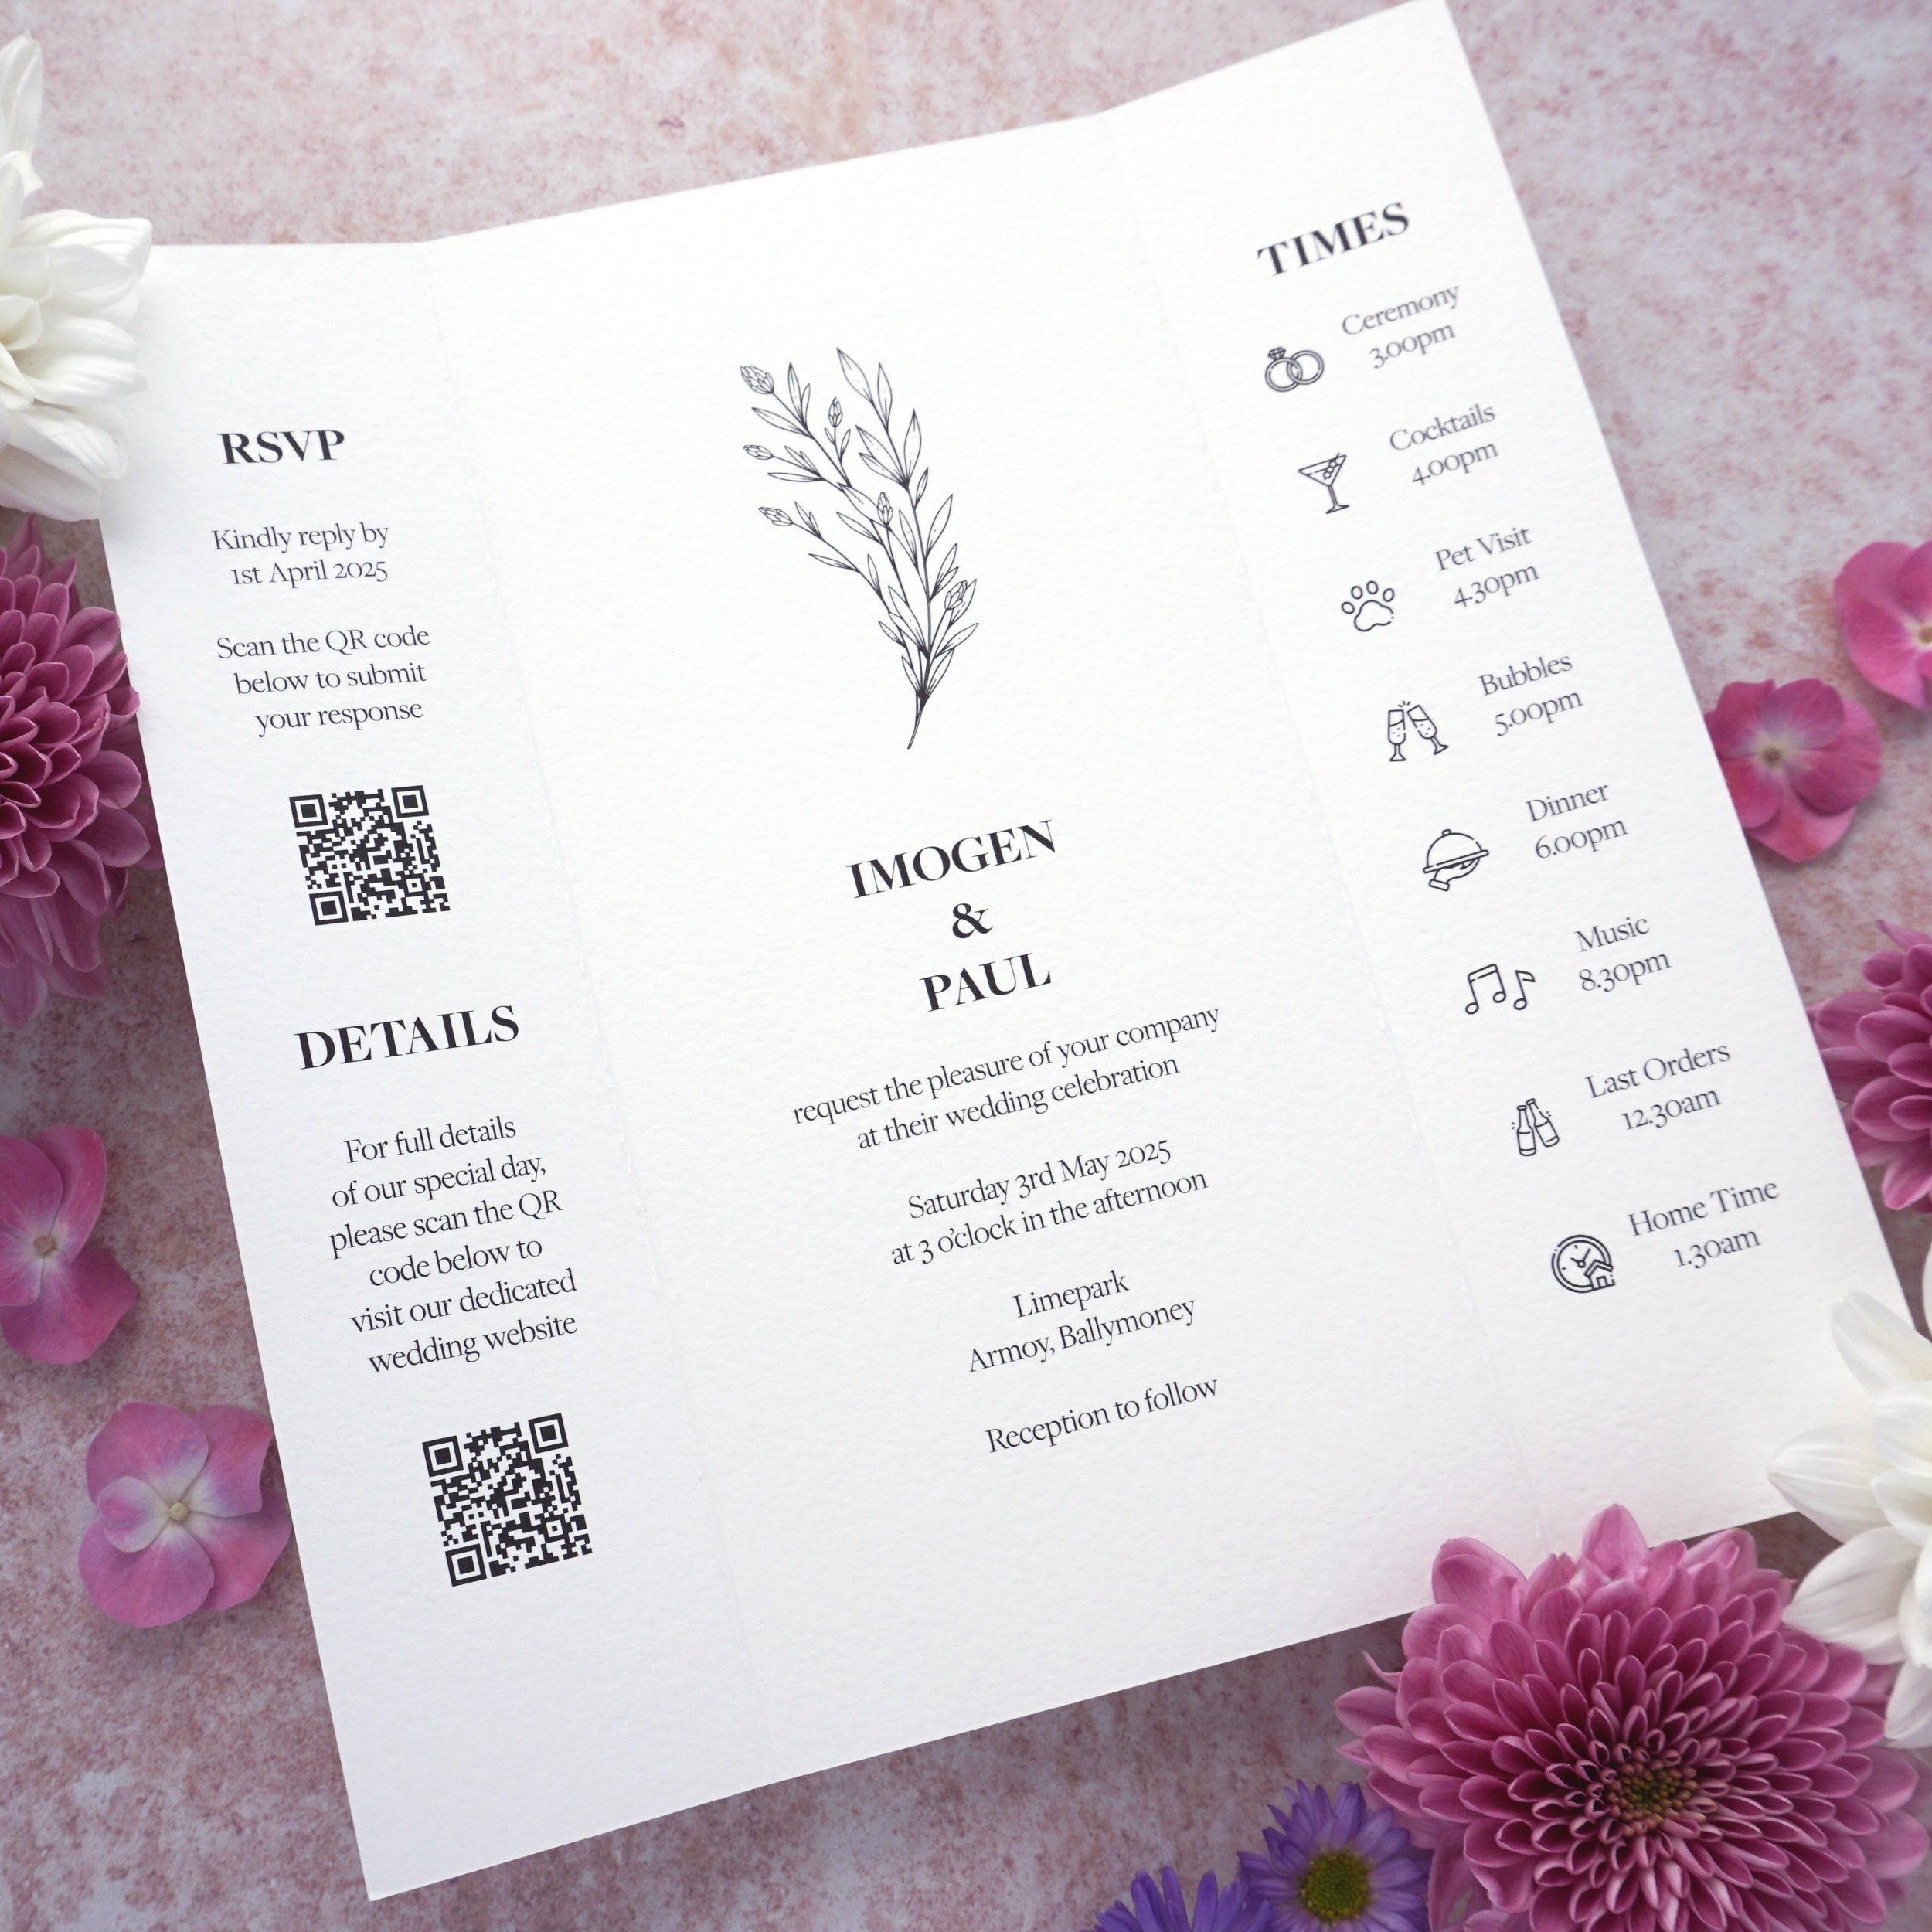 IMOGEN - Want all of your wedding information on one card? Look no further than the Imogen suite. This simplistic gate fold card lets you include all of the important details for your big day without sacrificing on style. The best part... choose how 